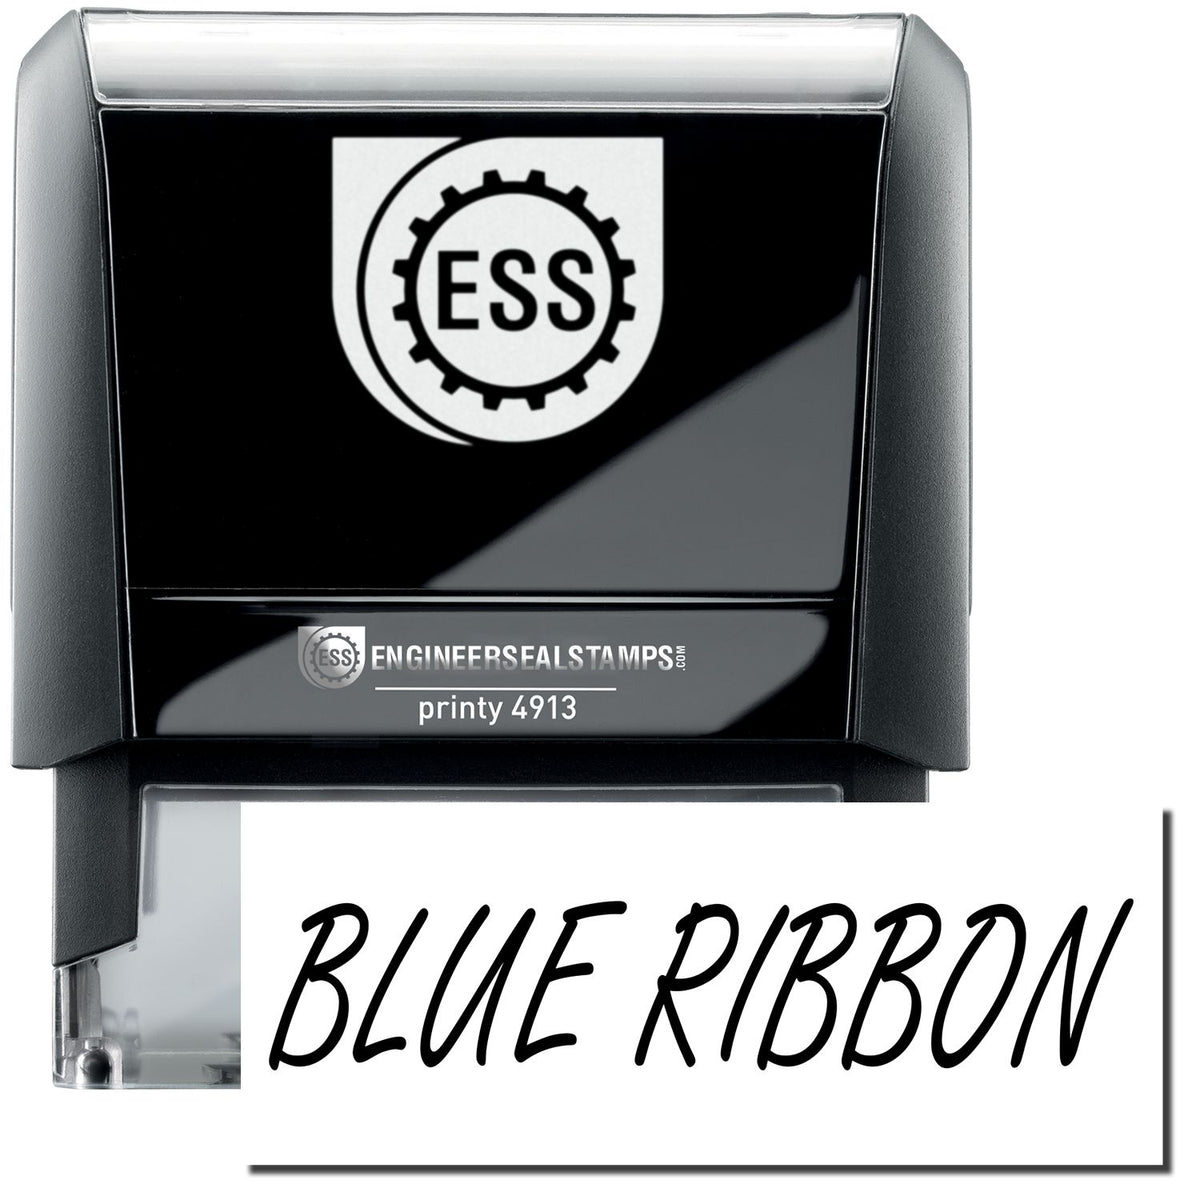 A self-inking stamp with a stamped image showing how the text &quot;BLUE RIBBON&quot; in an italic large bold font is displayed by it.